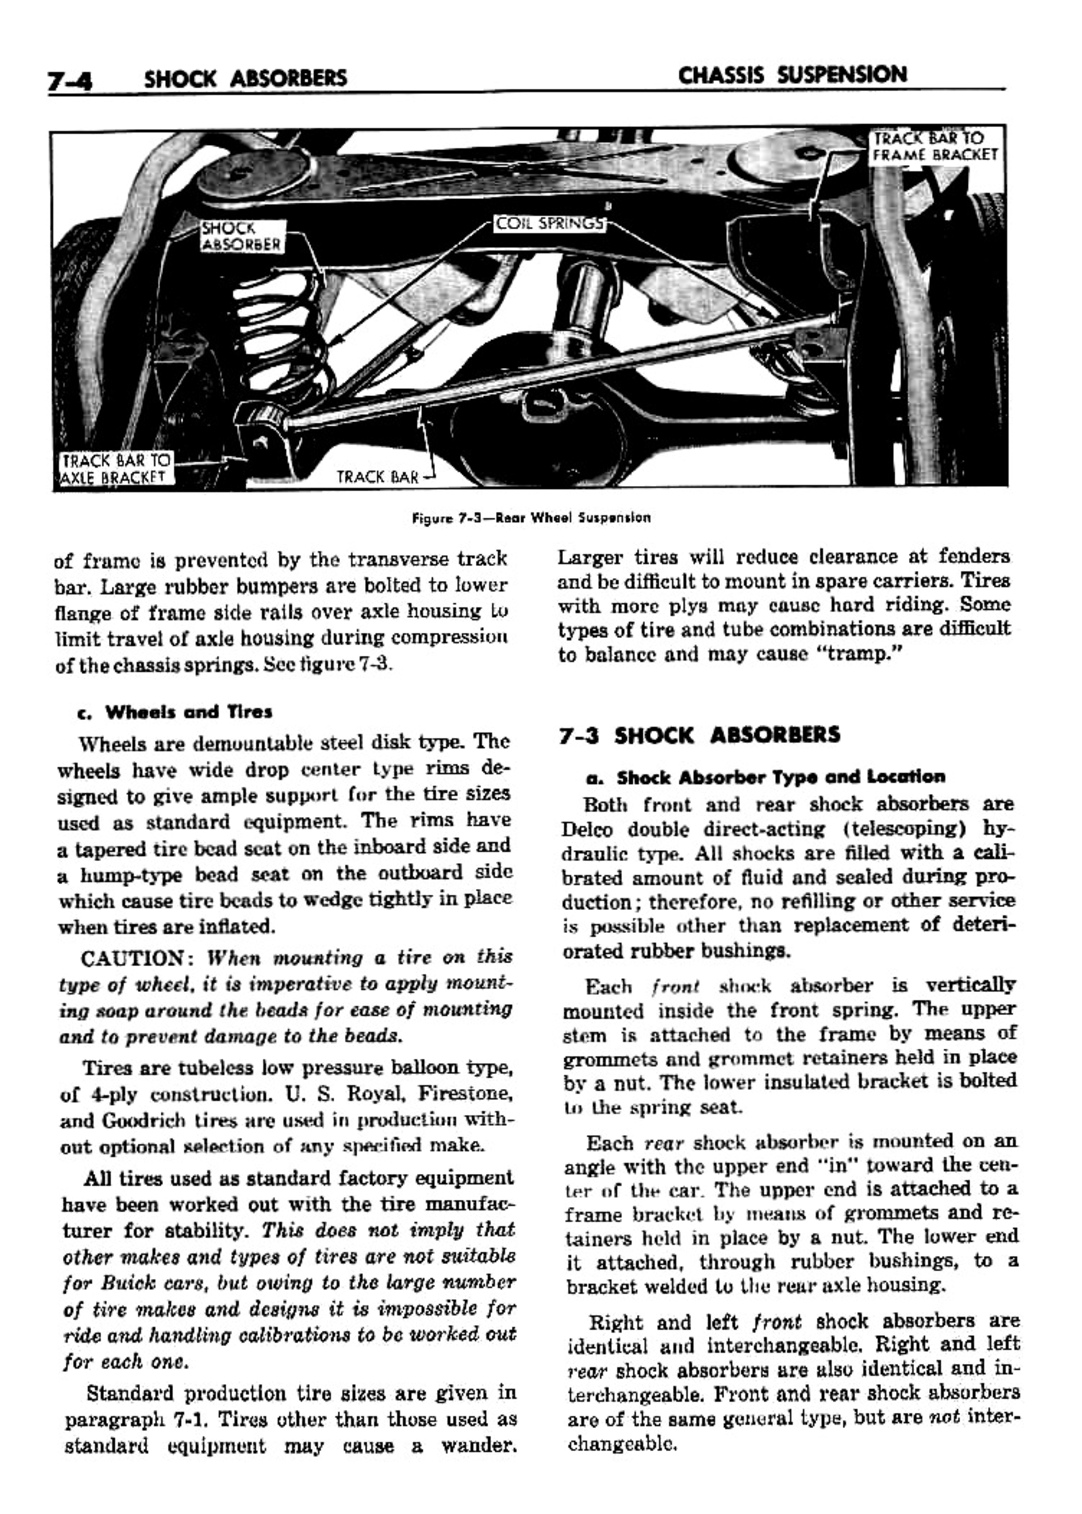 n_08 1959 Buick Shop Manual - Chassis Suspension-004-004.jpg